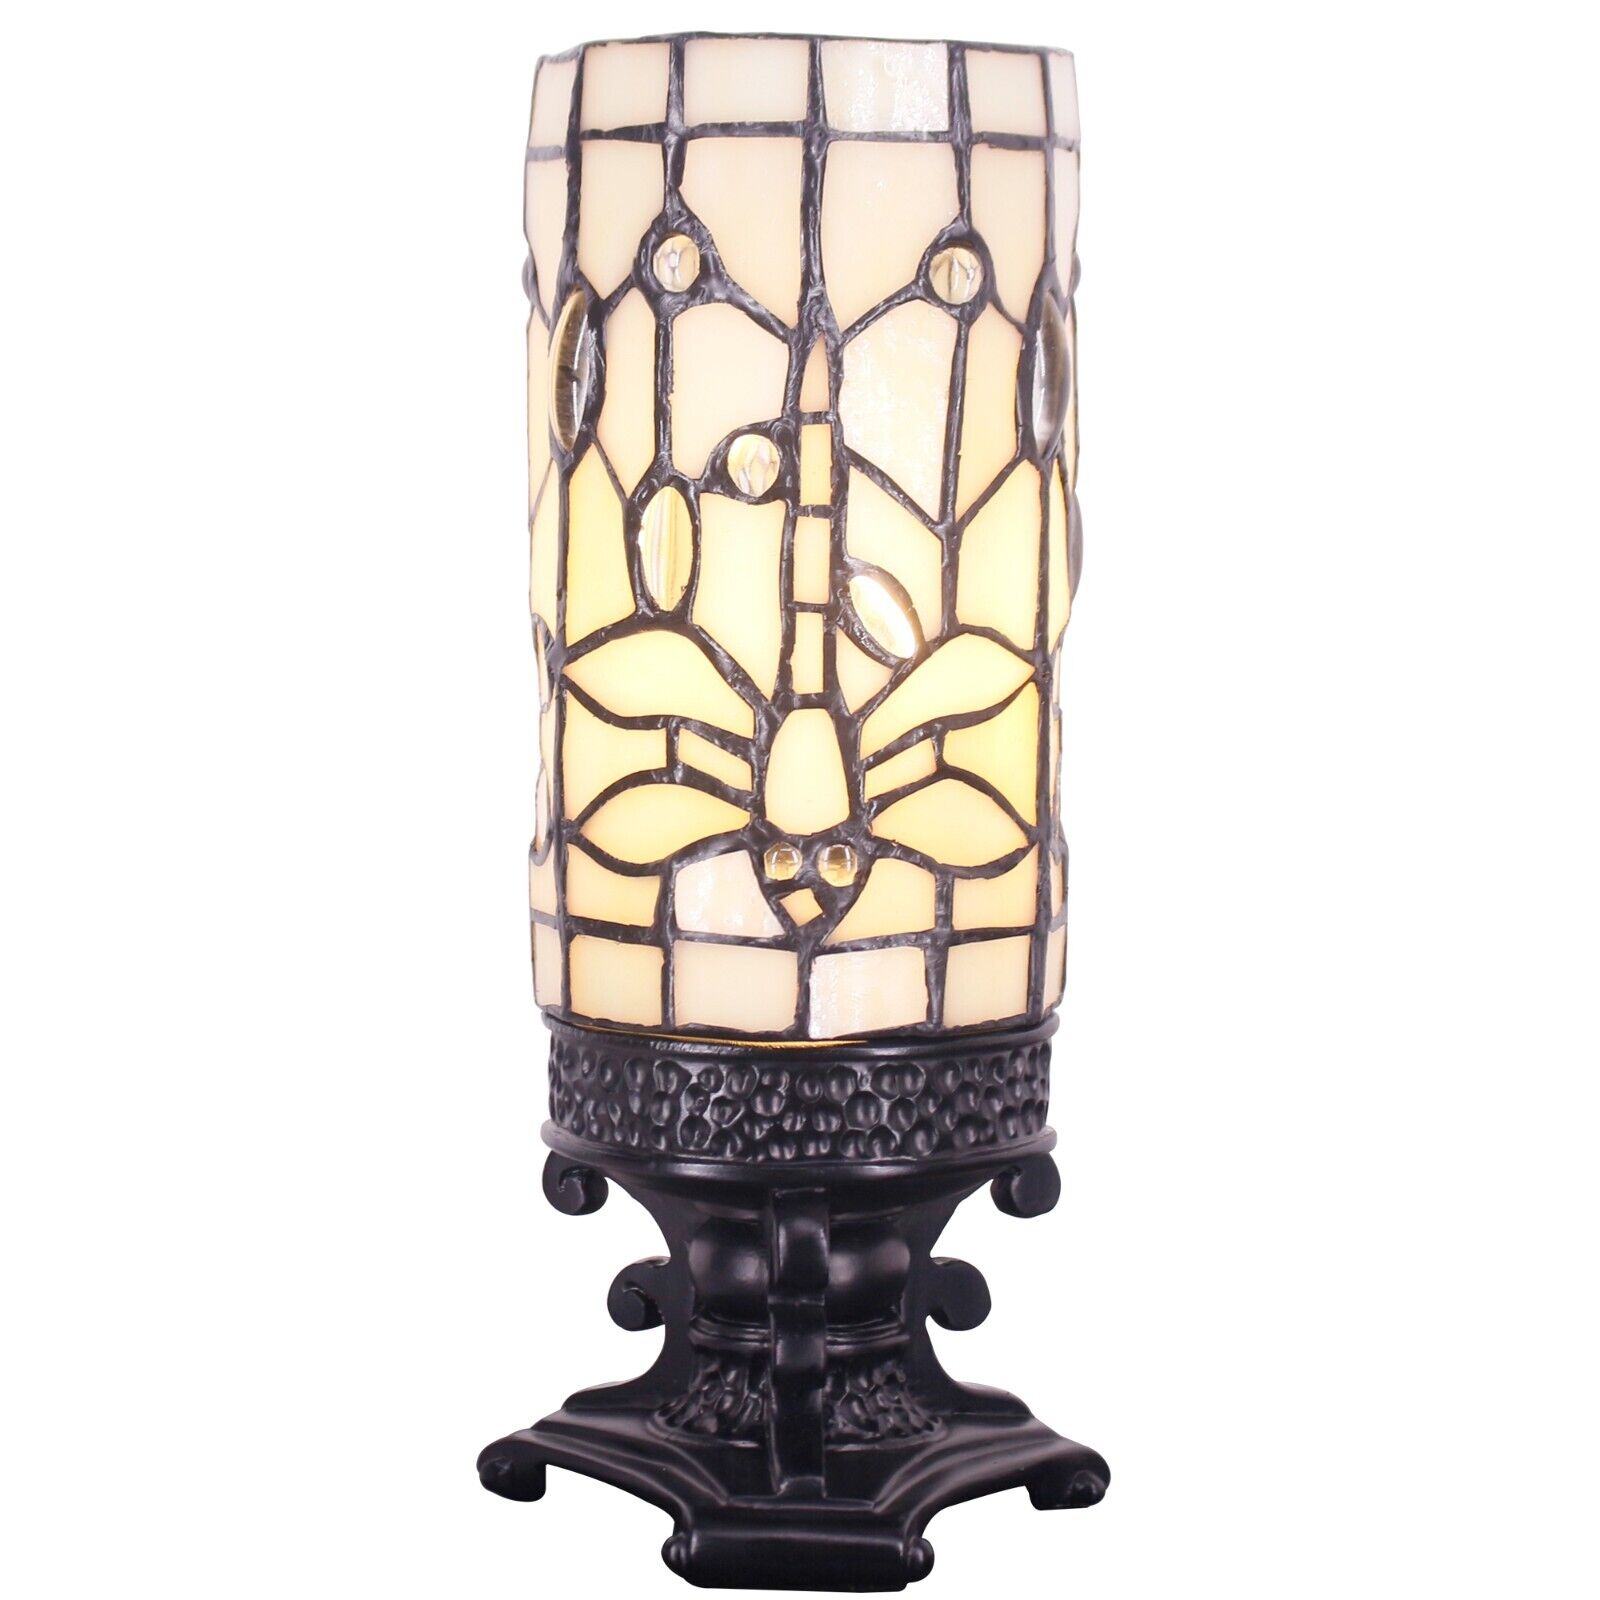 Tiffany Table Lamp Bedside Lamp Floral Stained Glass Lamp Desk Light 4x10inch